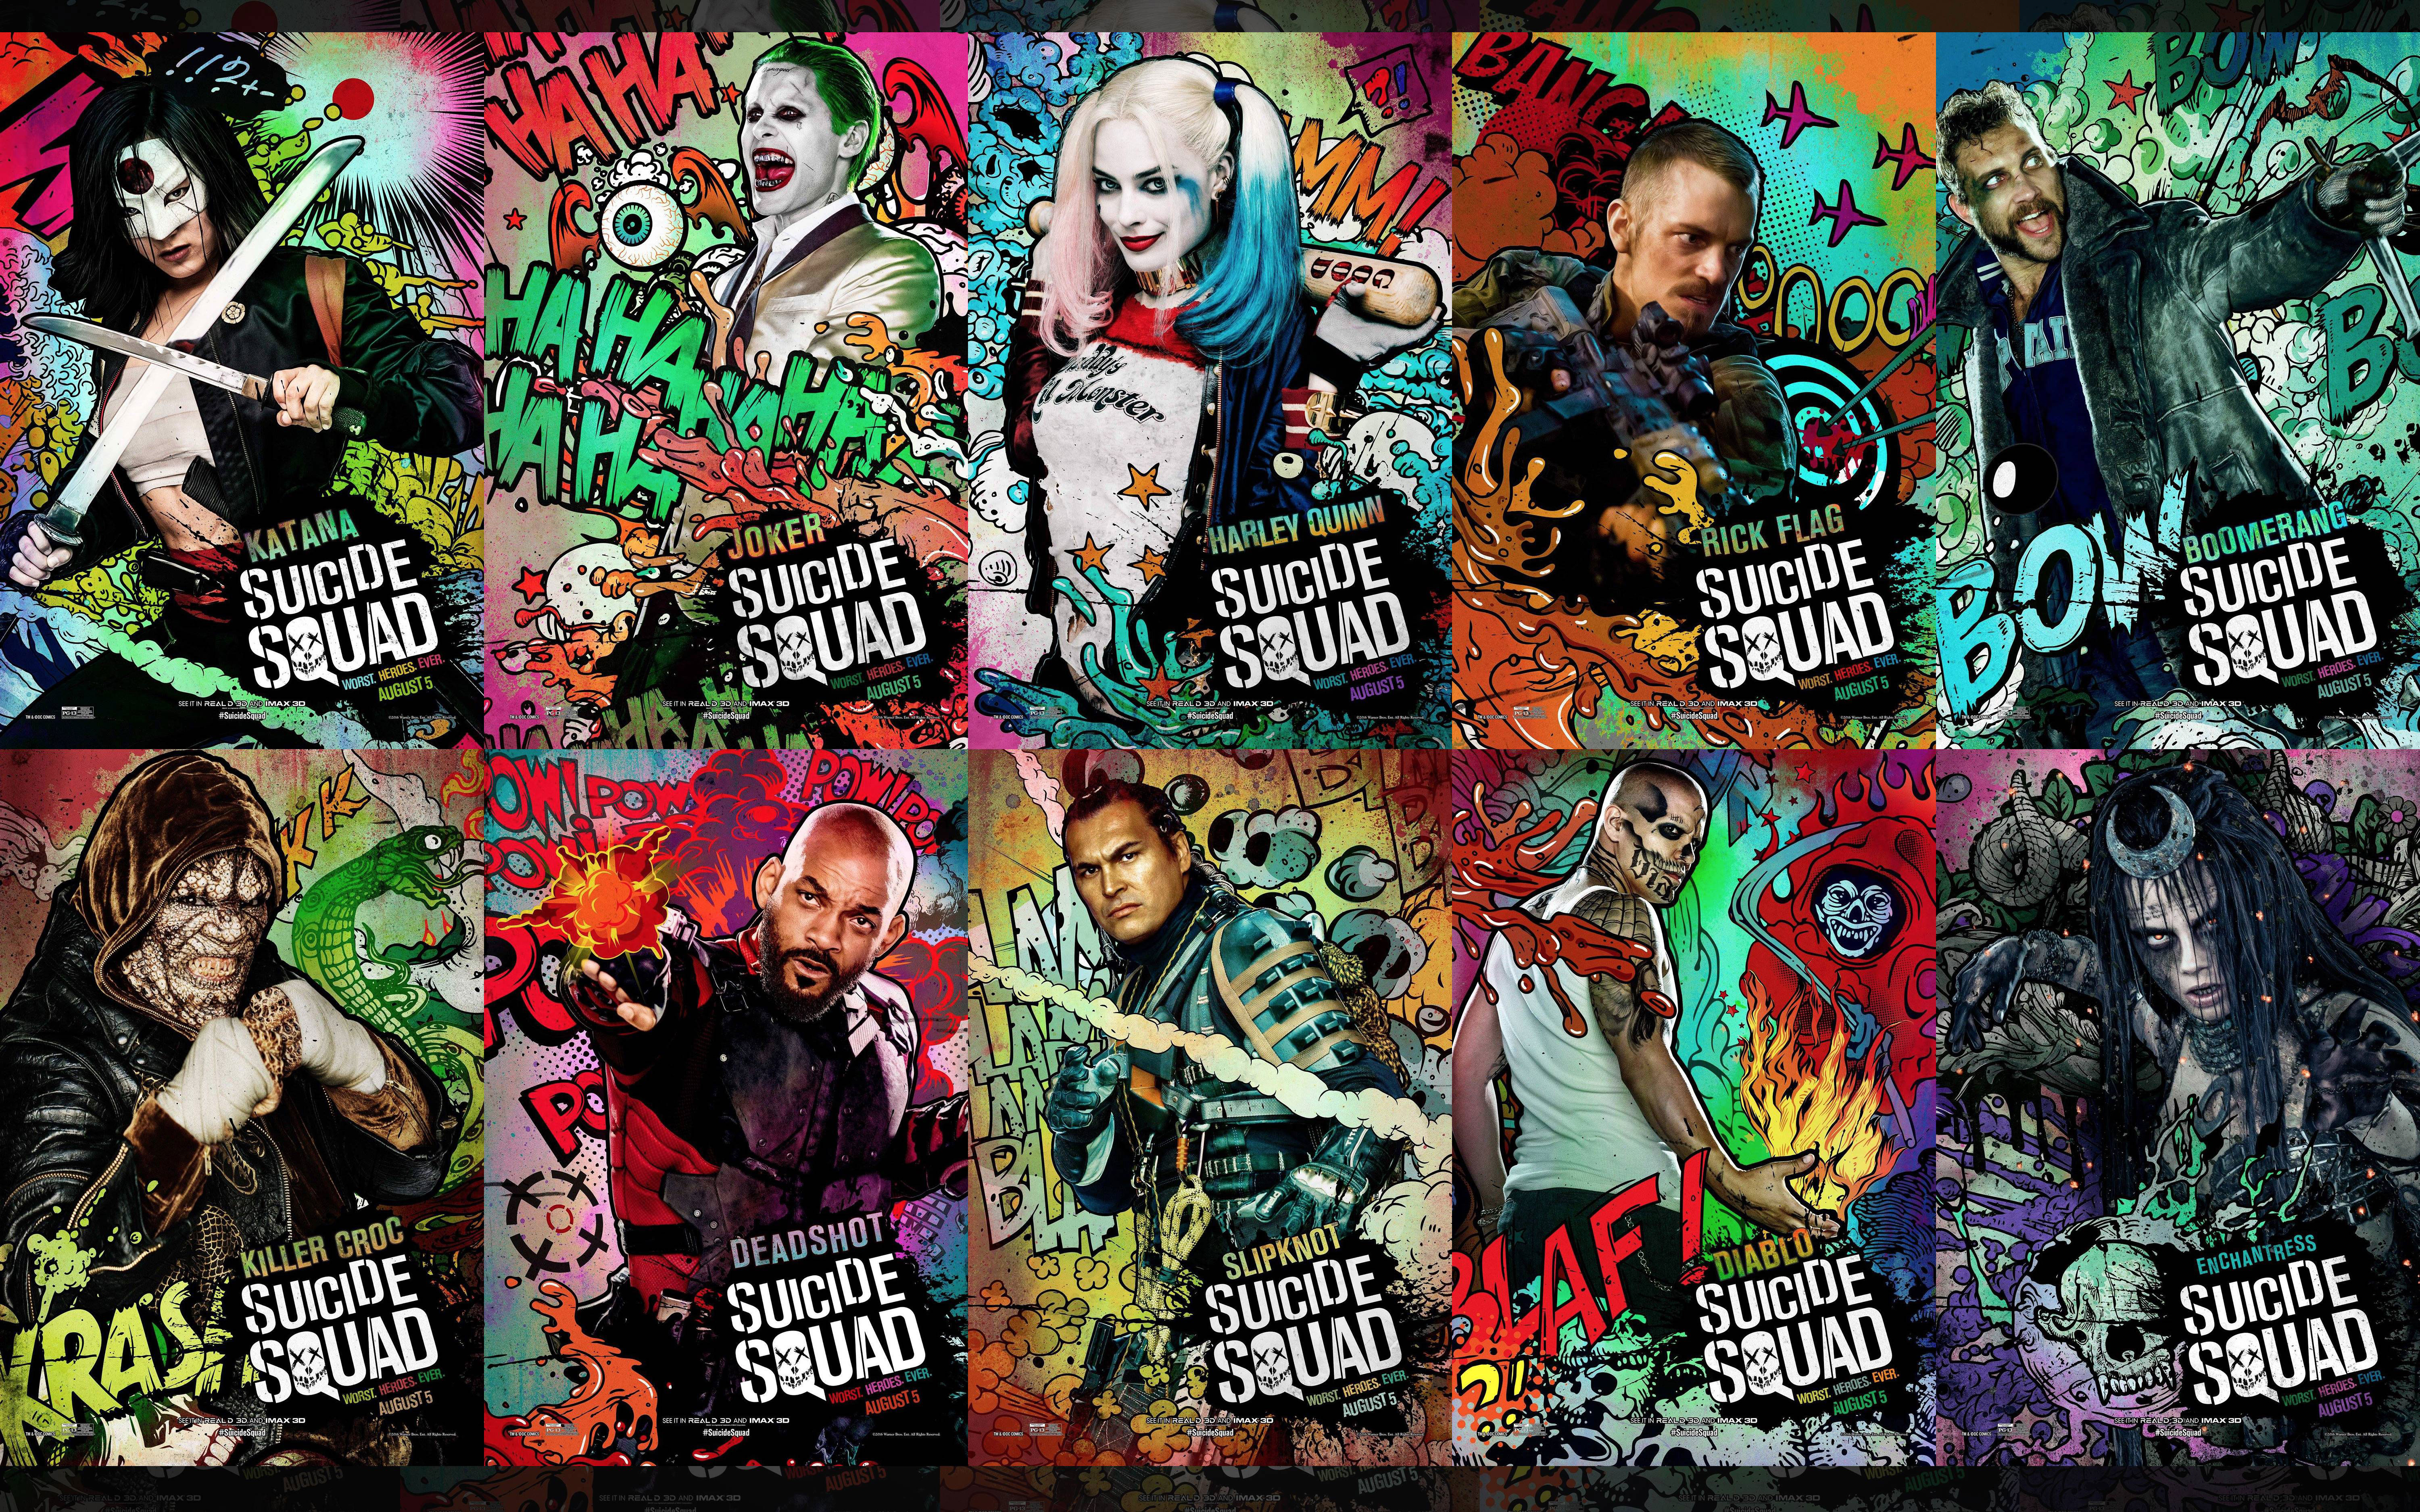 Suicide Squad Pic Free Download Wallpaper, Suicide Squad, Movies